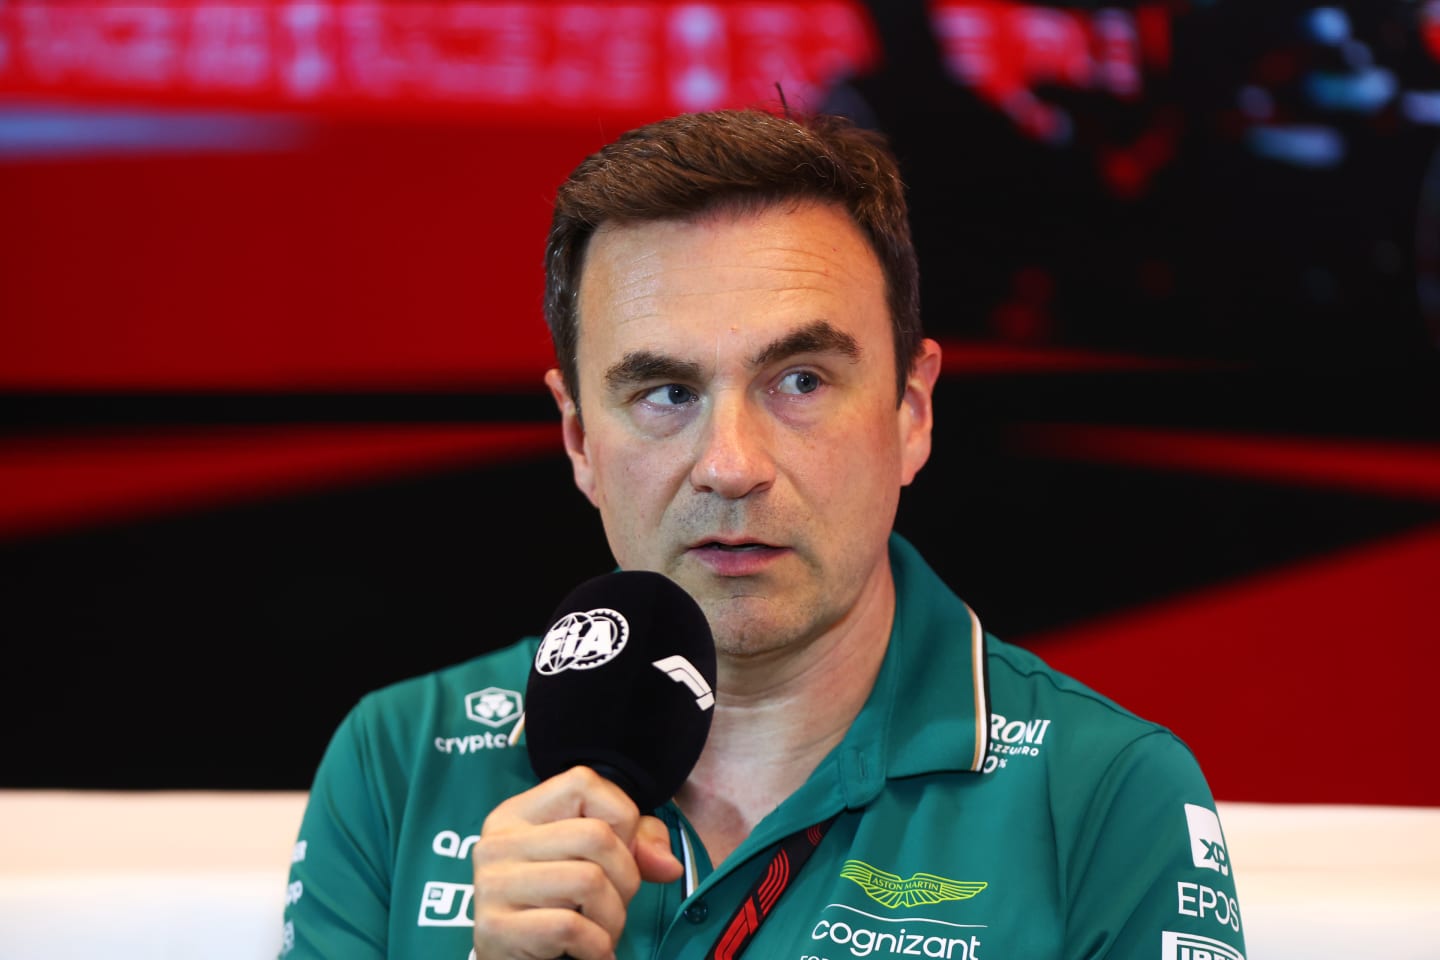 MONTREAL, QUEBEC - JUNE 16: Dan Fallows, Technical Director of Aston Martin F1 attends the Team Principals Press Conference during practice ahead of the F1 Grand Prix of Canada at Circuit Gilles Villeneuve on June 16, 2023 in Montreal, Quebec. (Photo by Dan Istitene/Getty Images)